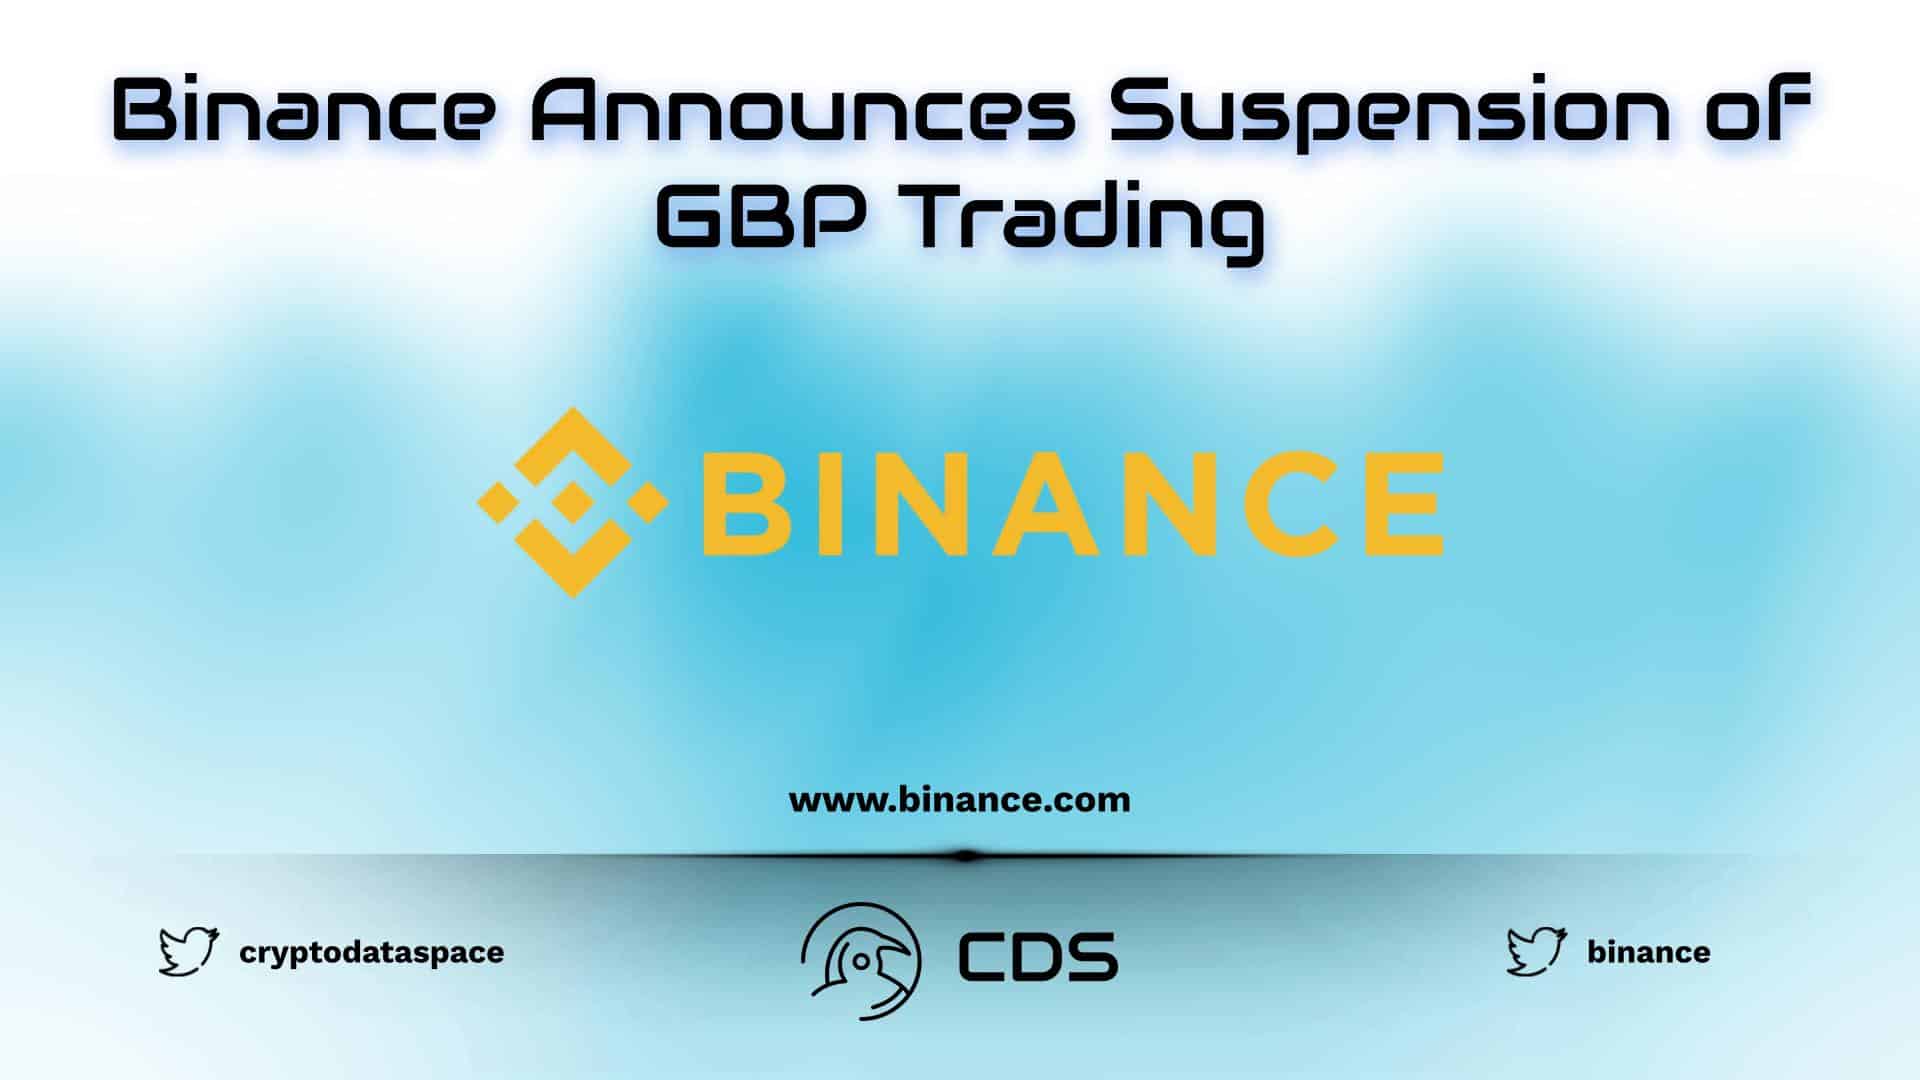 Binance Announces Suspension of GBP Trading